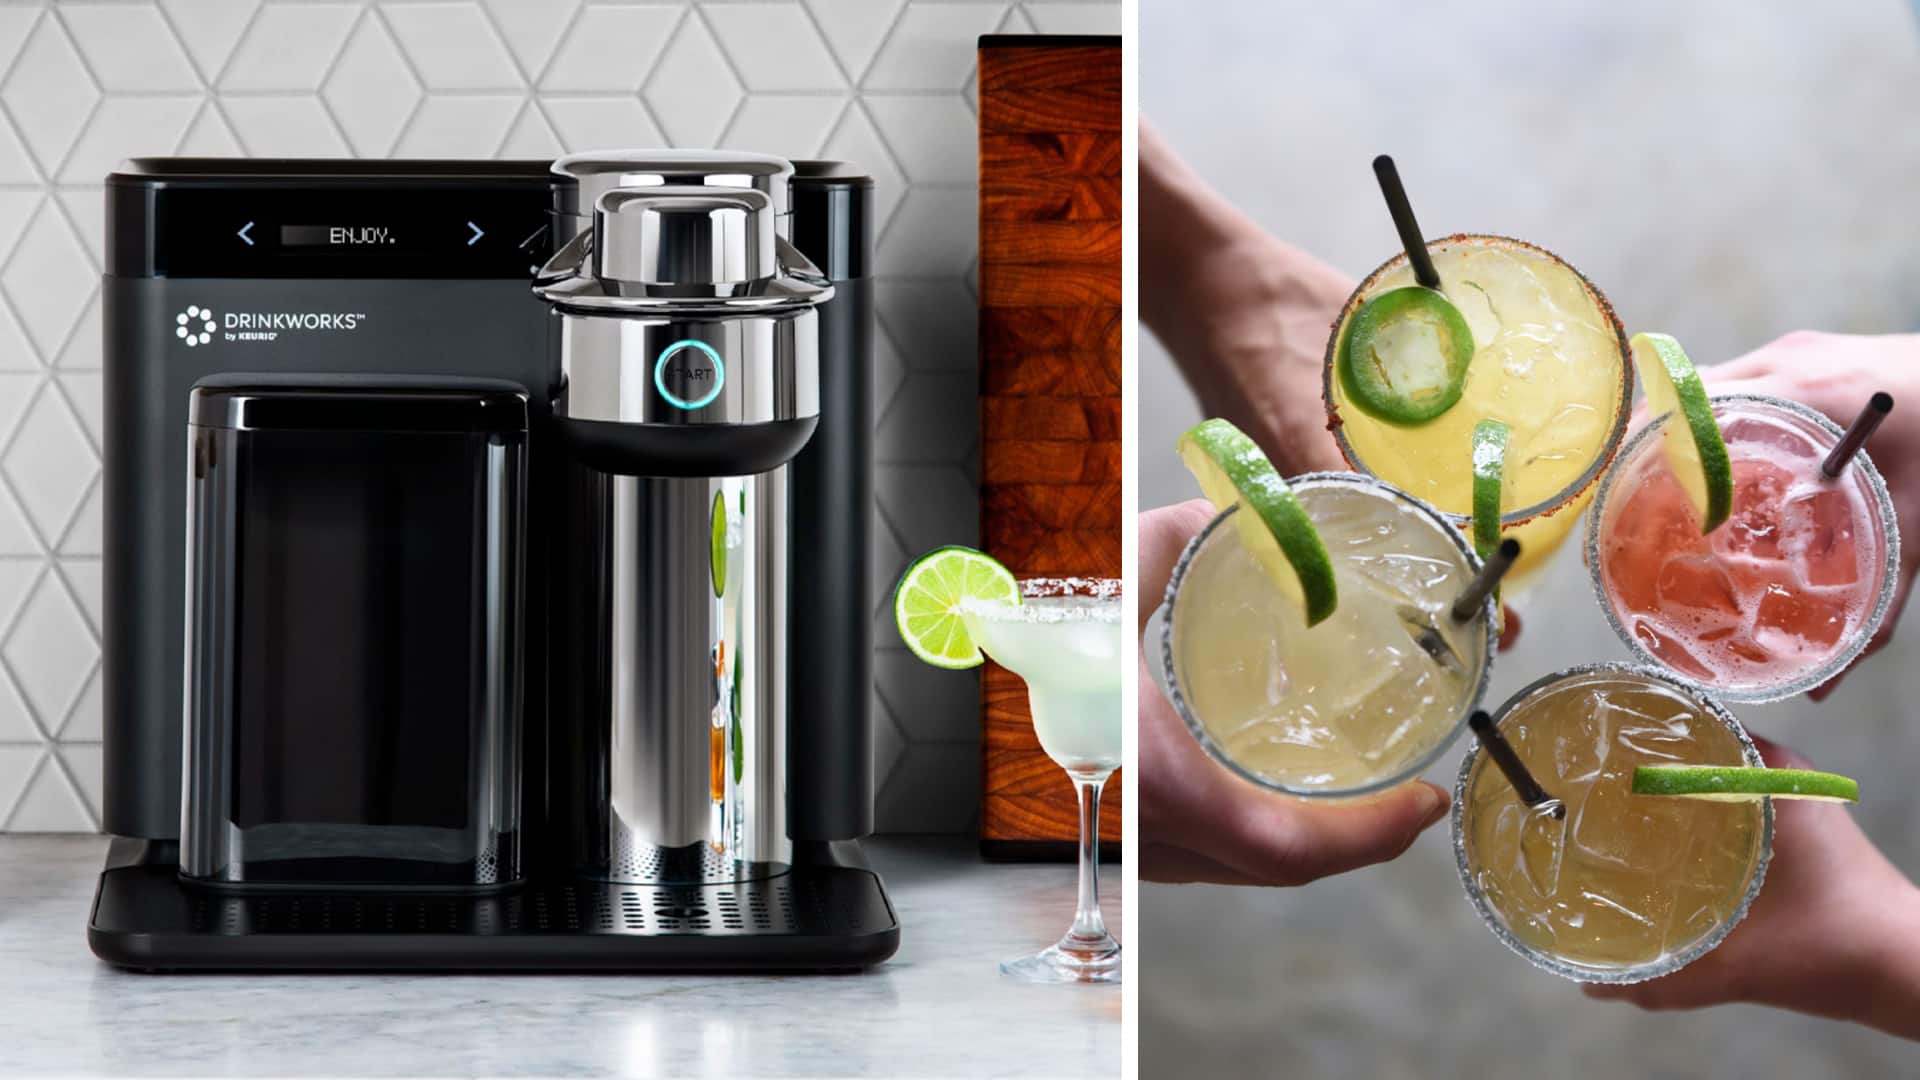 Keurig coffee makers are on sale for as low as $50 on